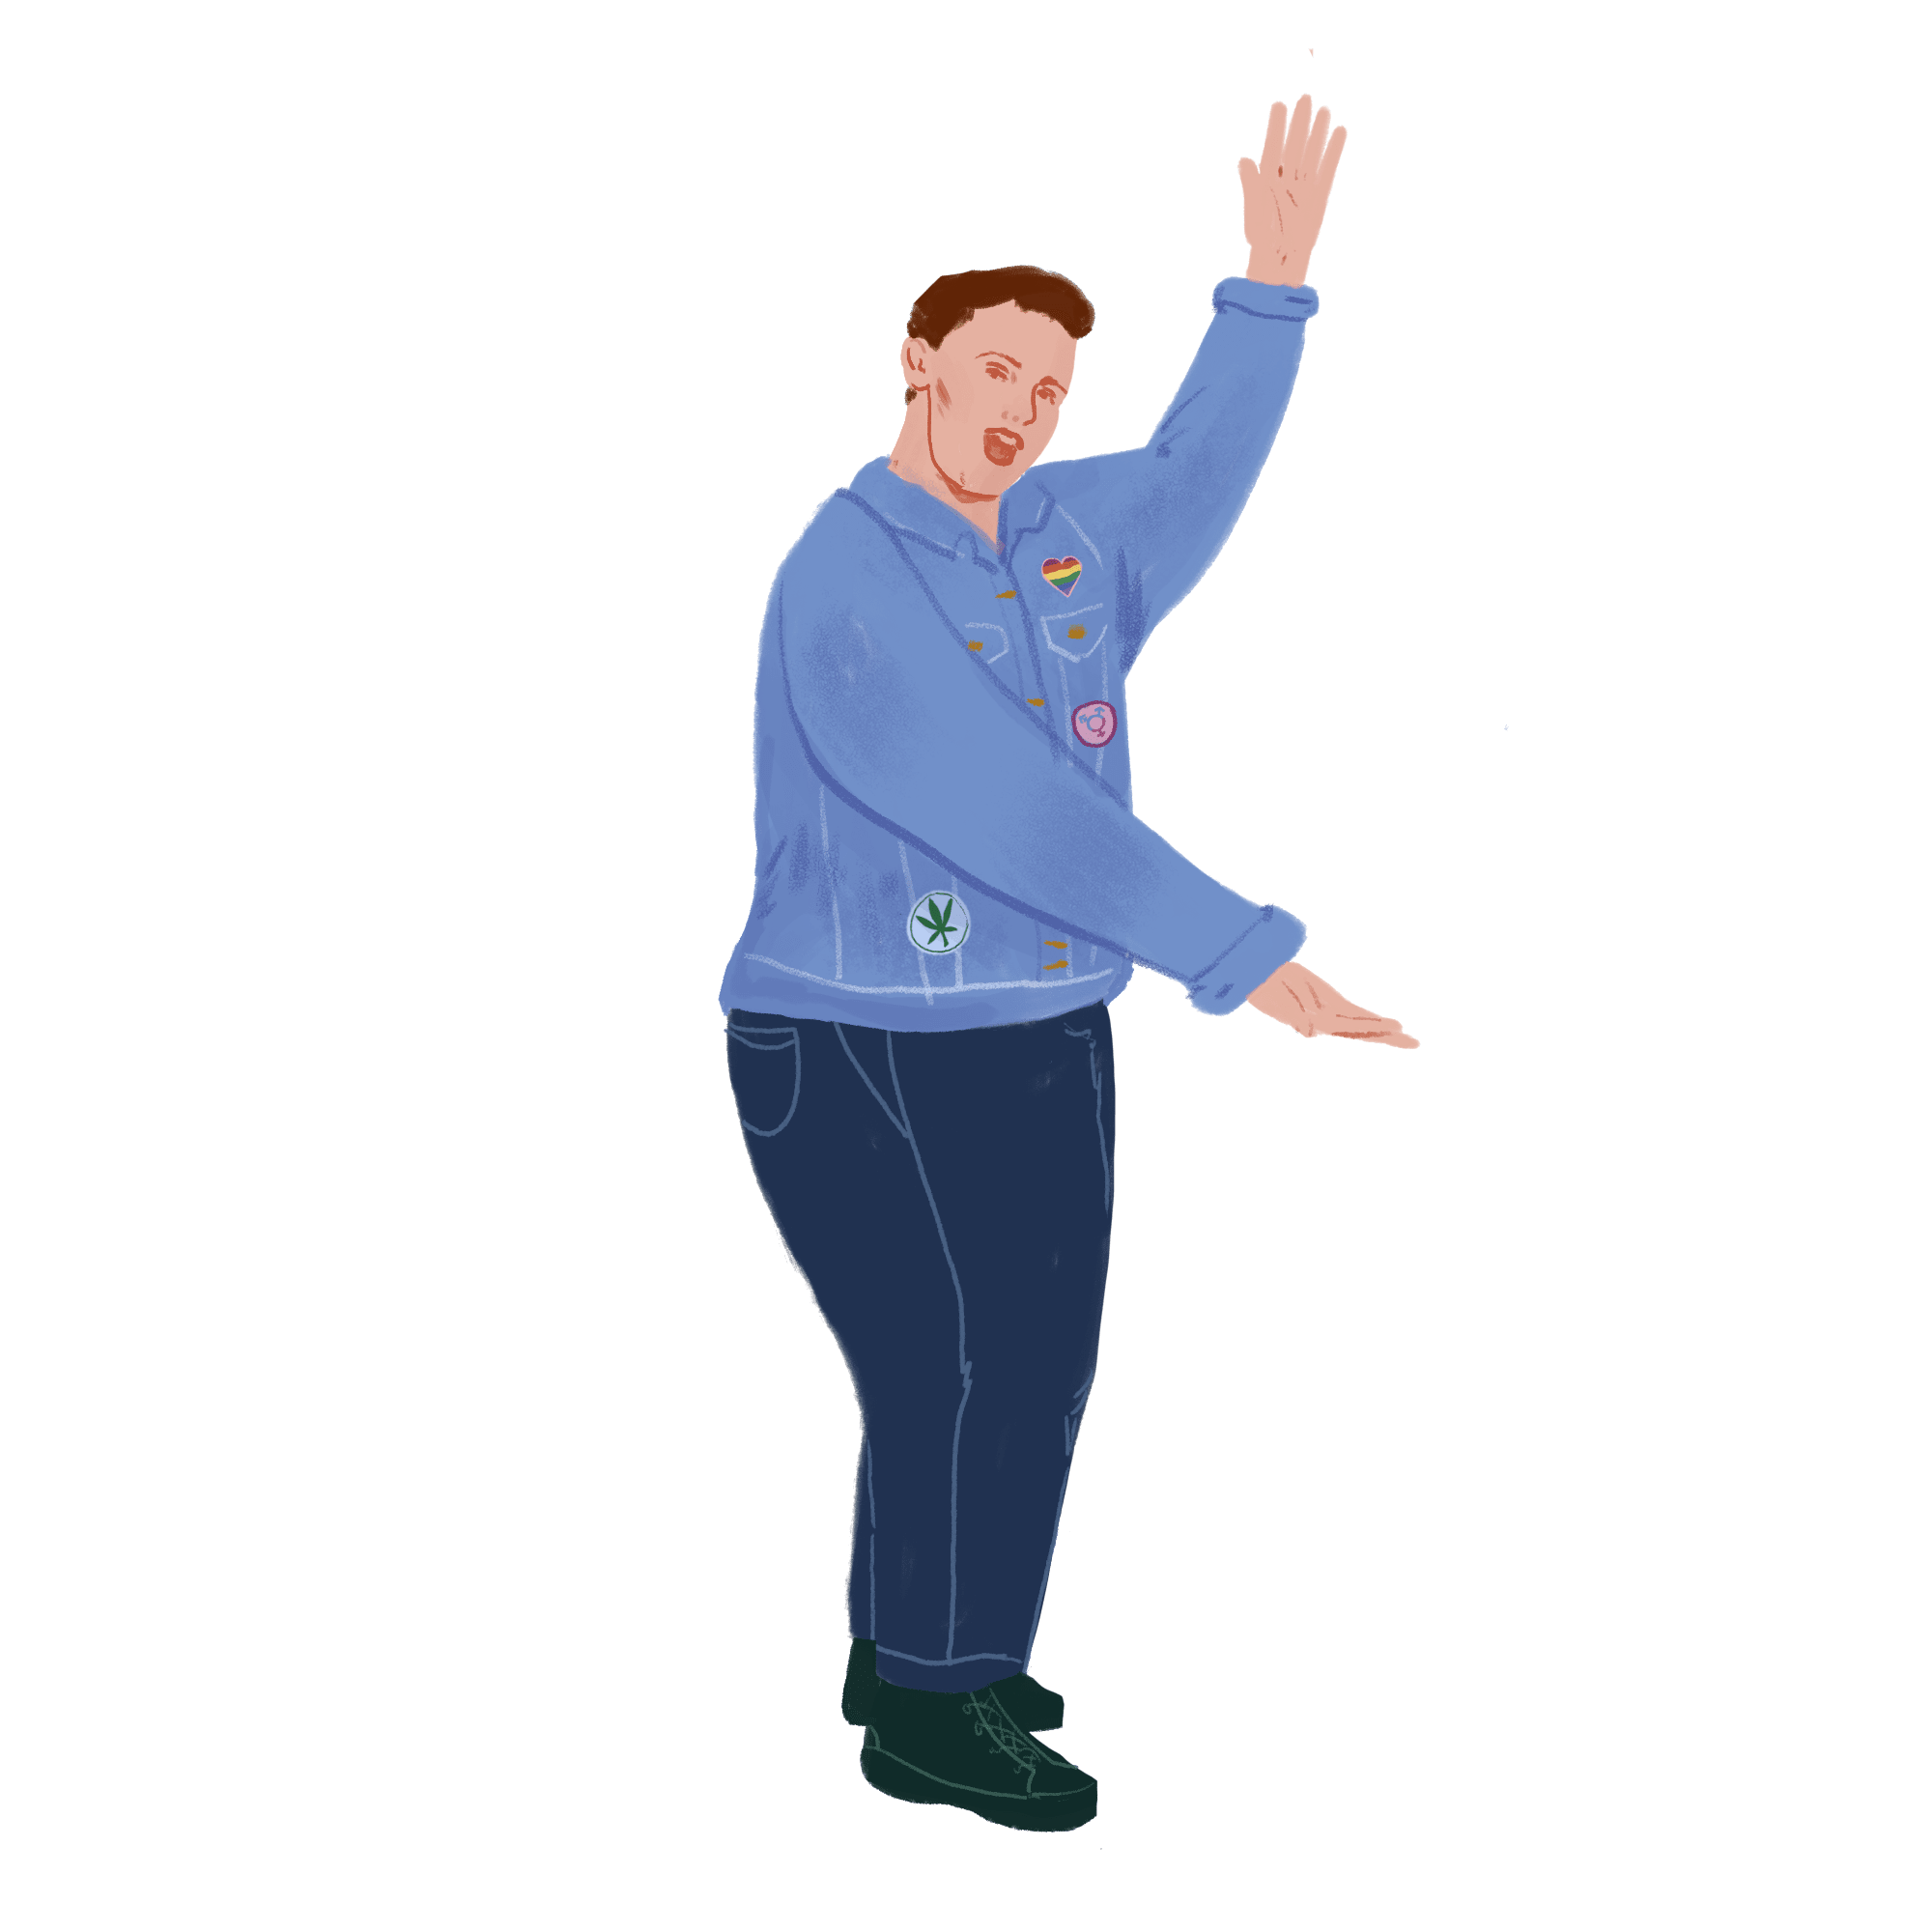 An illustration of Get Sensible Project Manager, Sean Bristowe, wearing a blue collared button up shirt and dark blue jeans.